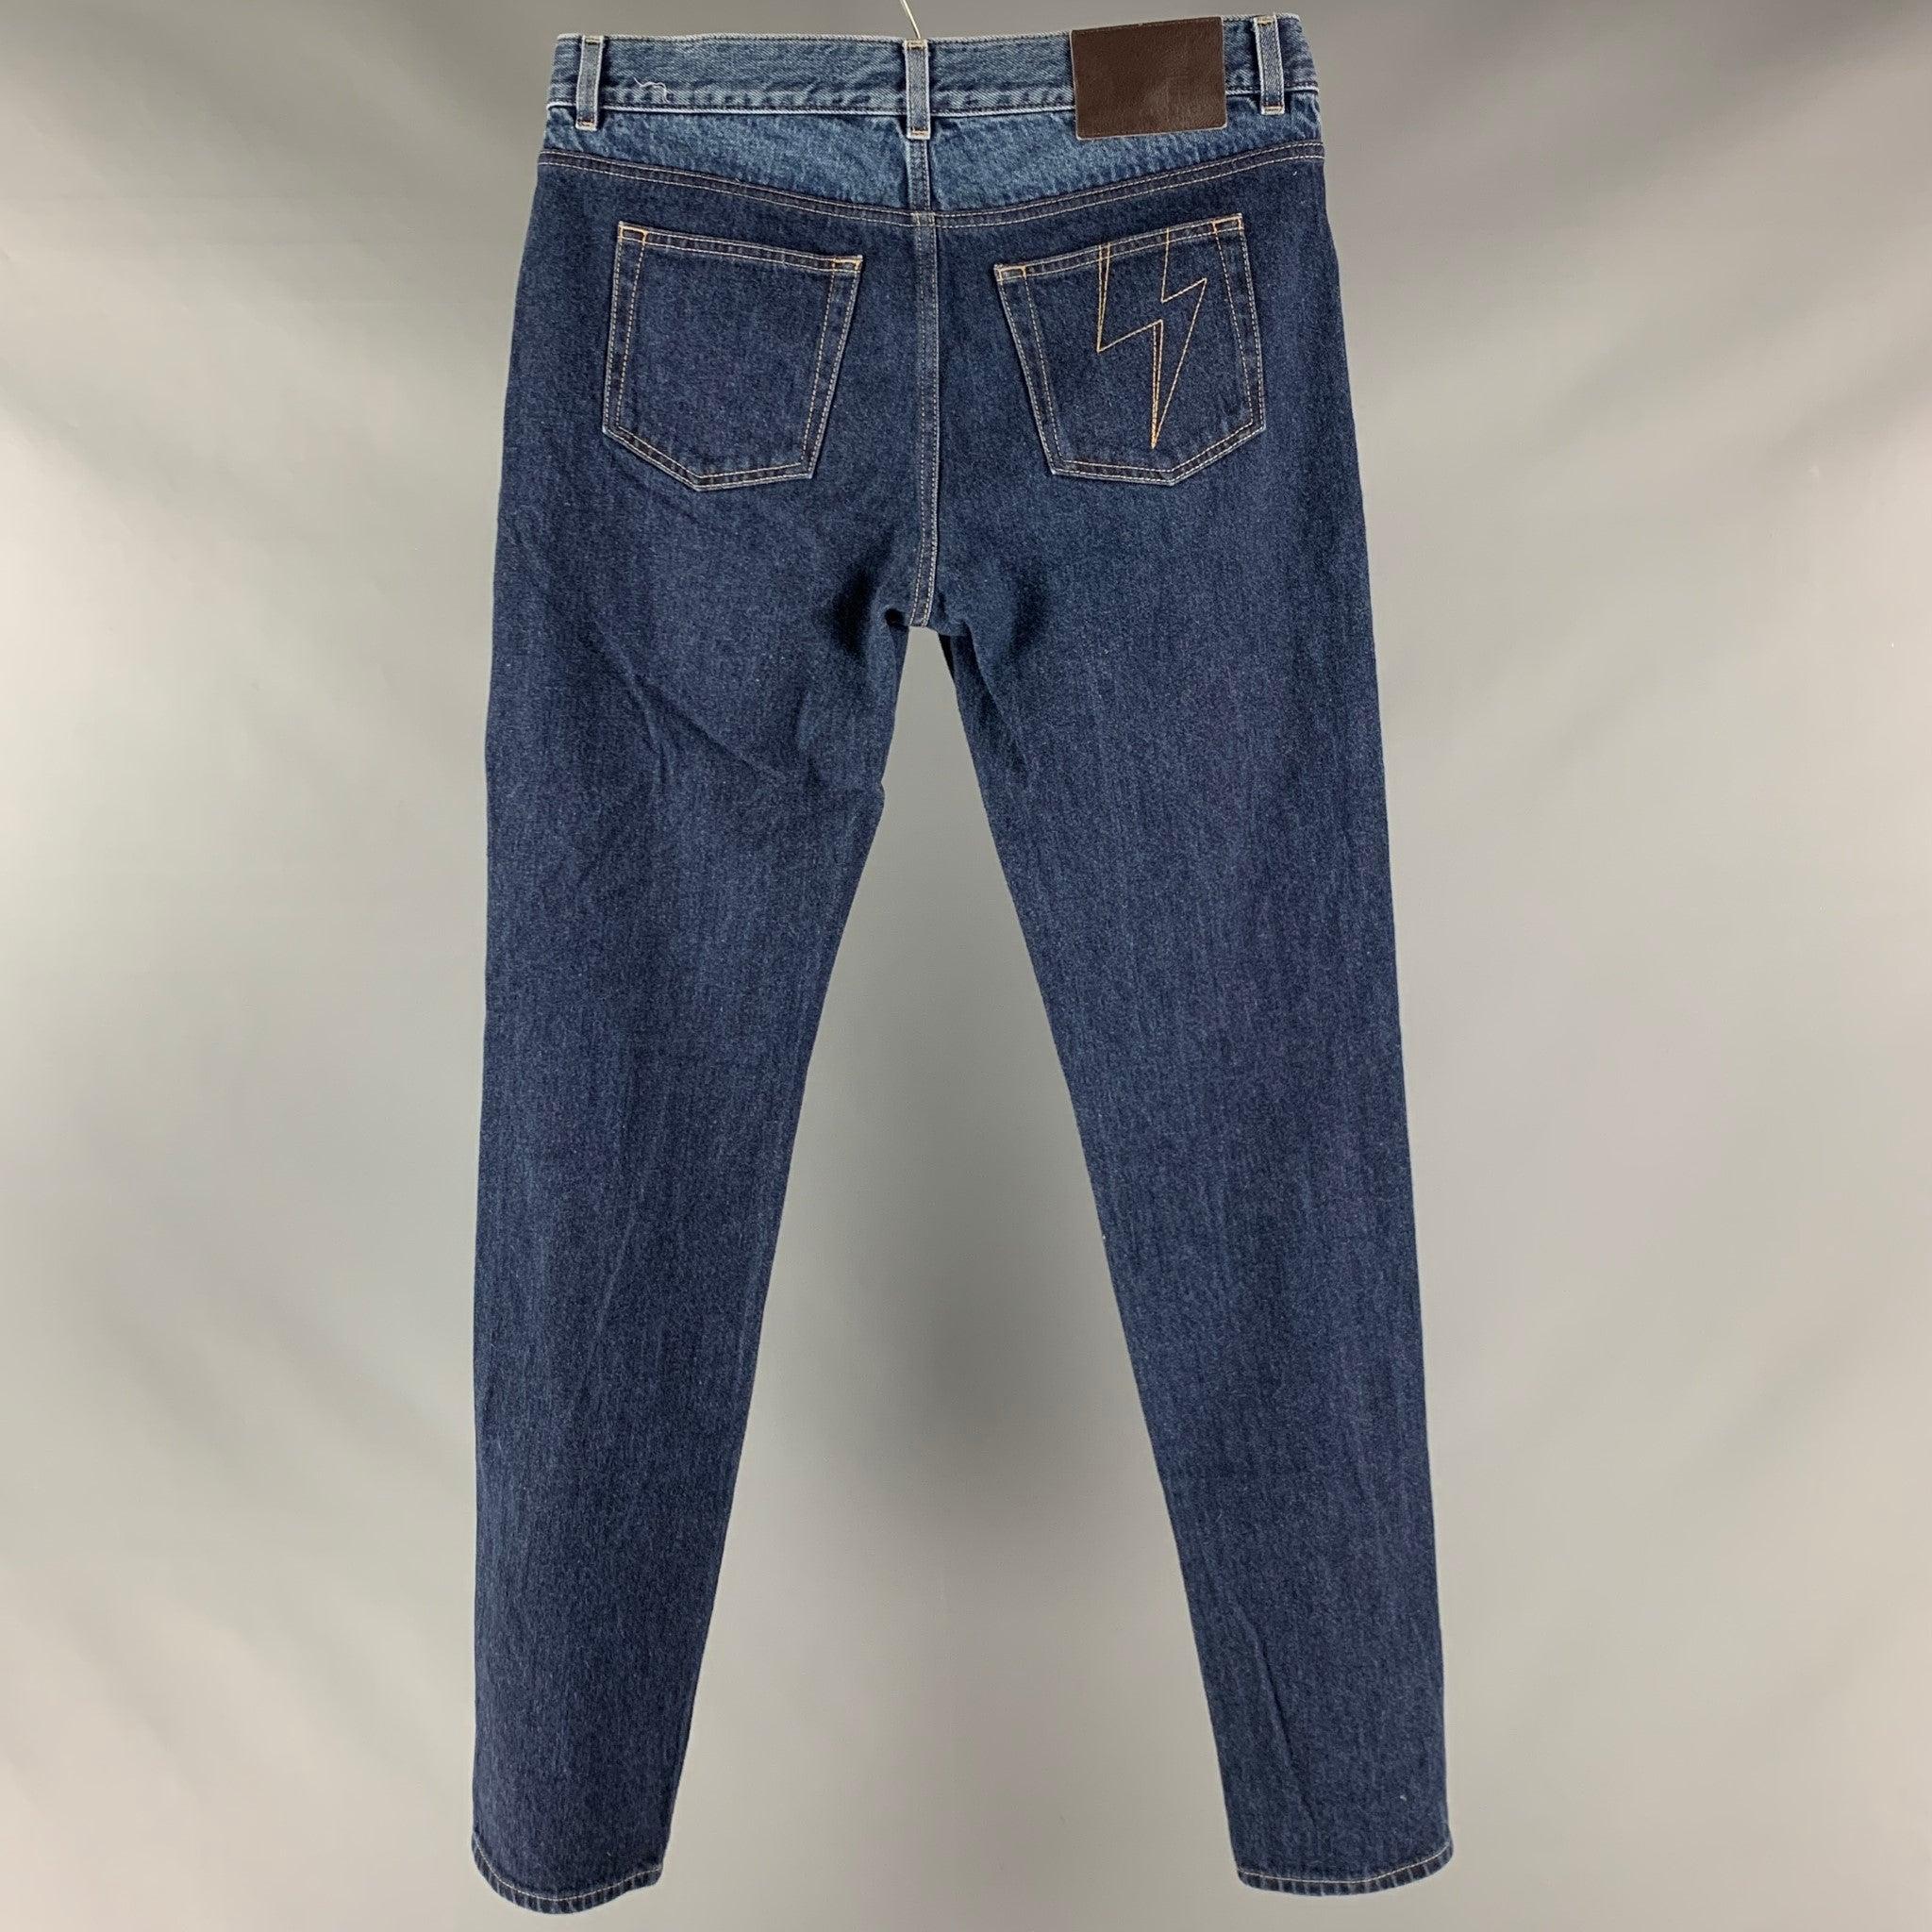 GIVENCHY jeans comes in an indigo denim selvedge featuring a color block, straight leg, contrast stitching, and a button fly closure. Made in Italy. Excellent Pre-Owned Condition. 

Marked:   32 

Measurements: 
  Waist: 32 inches Rise: 9 inches